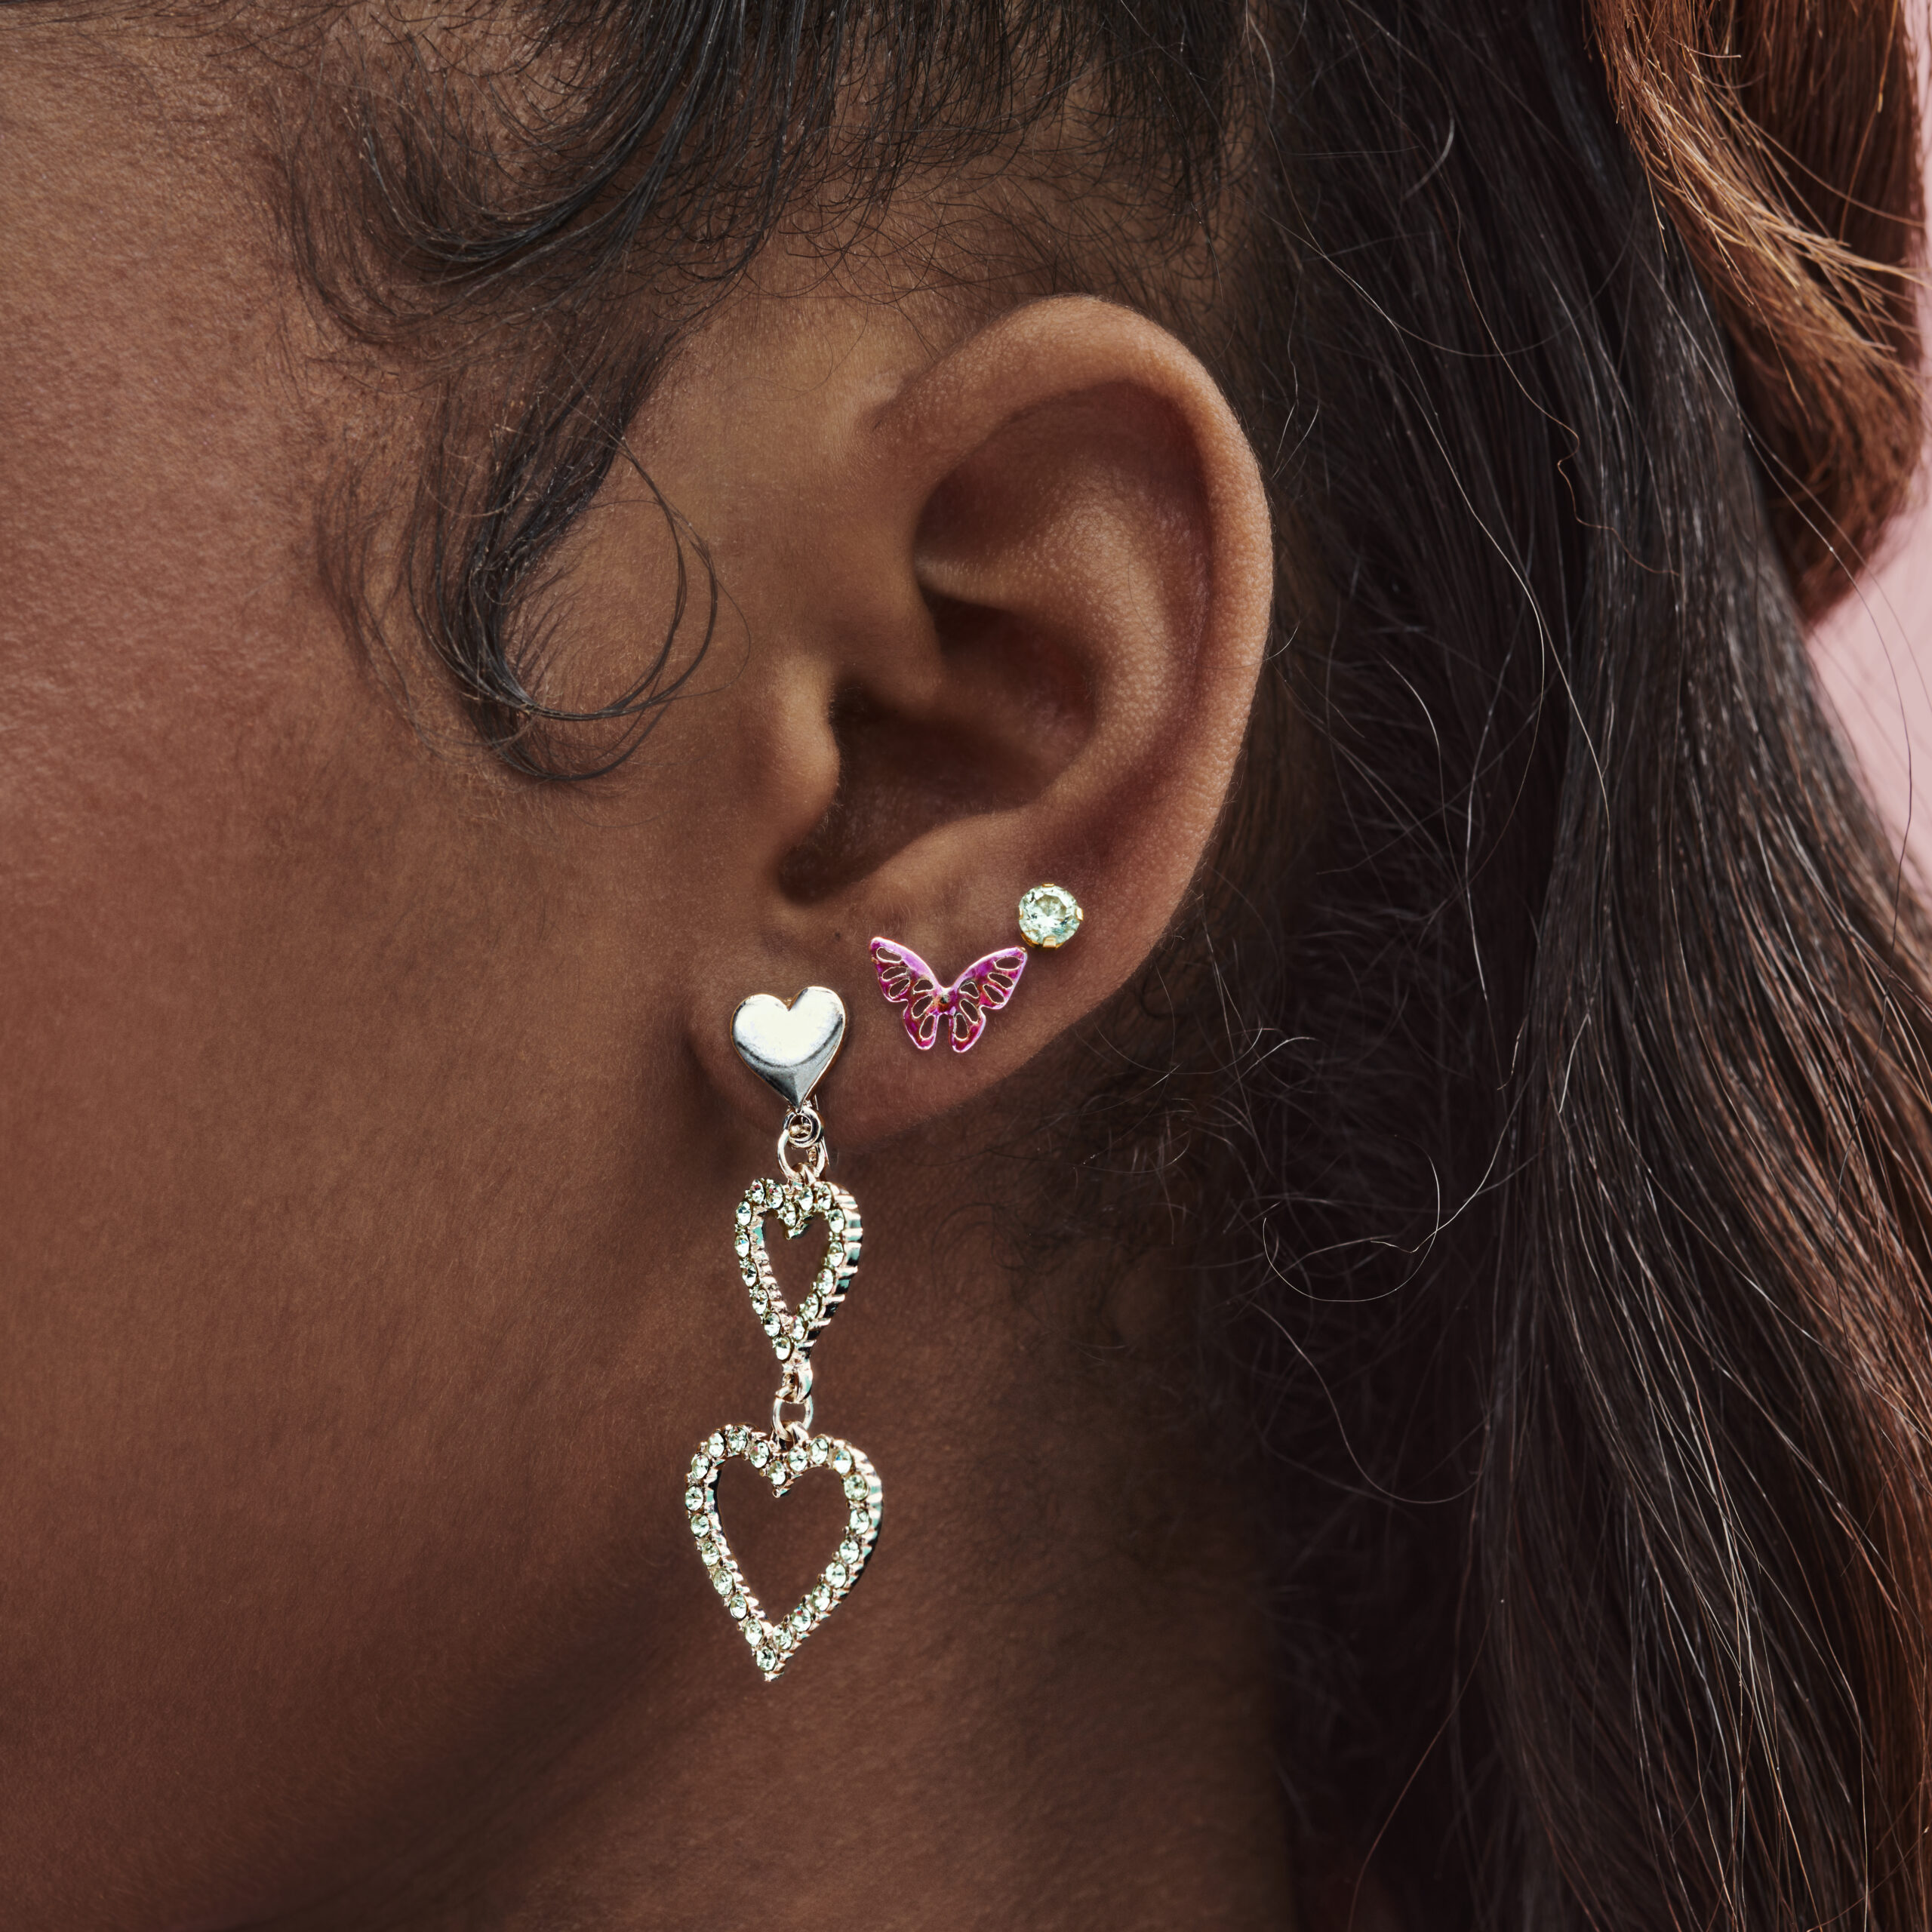 That Girl Lay Lay Says She Can ‘Never’ Leave The House Without Earrings